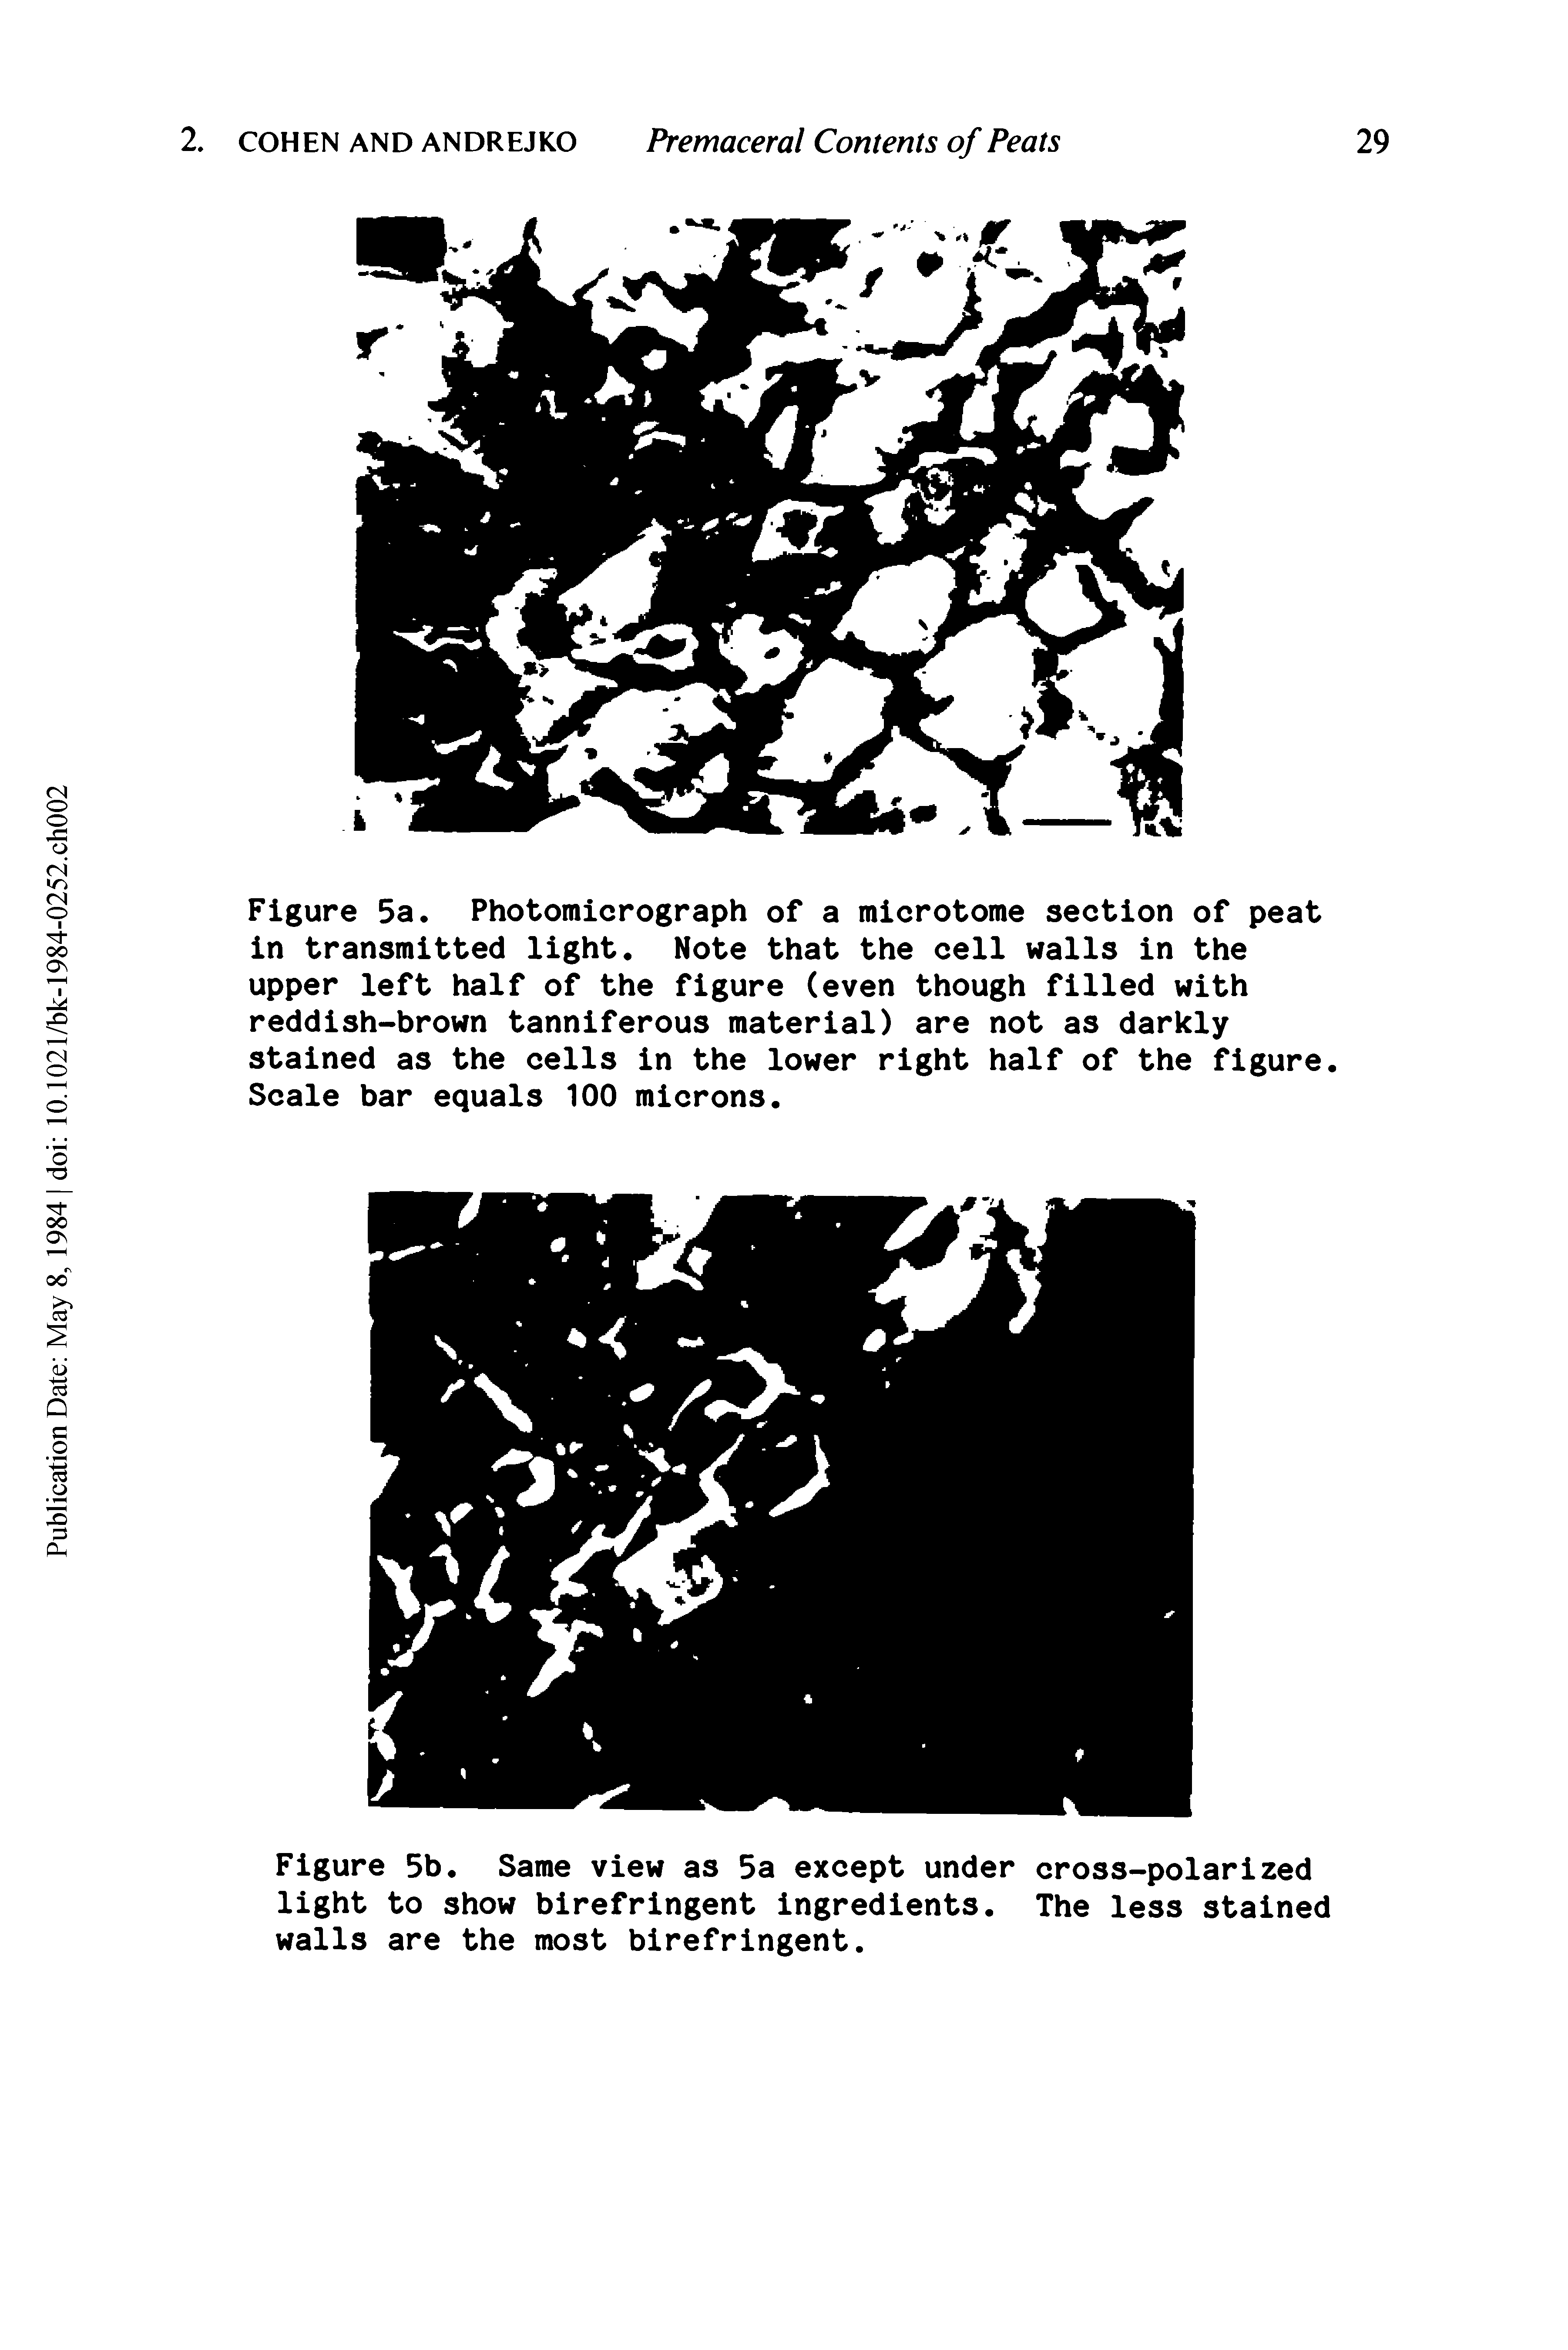 Figure 5b. Same view as 5a except under cross-polarized light to show birefringent ingredients. The less stained walls are the most birefringent.